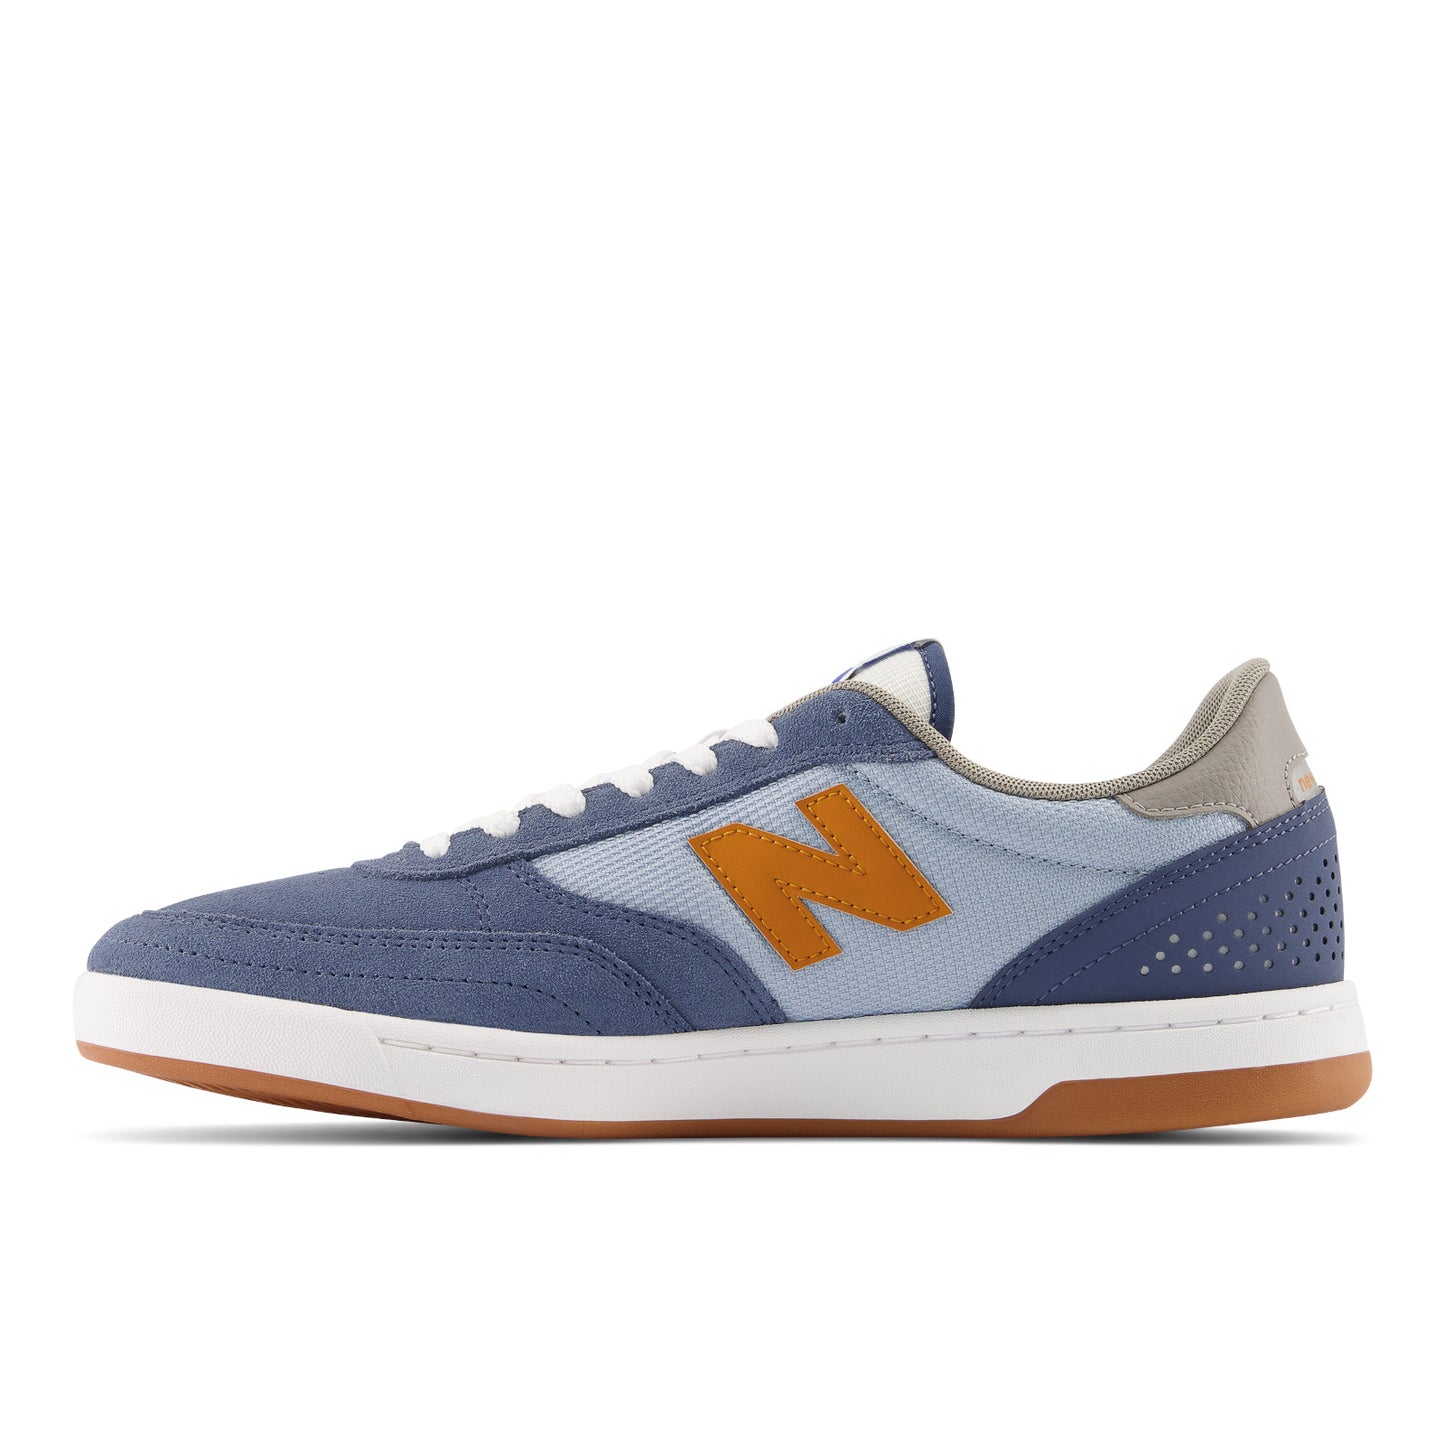 New Balance Numeric '440' Skate Shoes (Navy / Yellow)